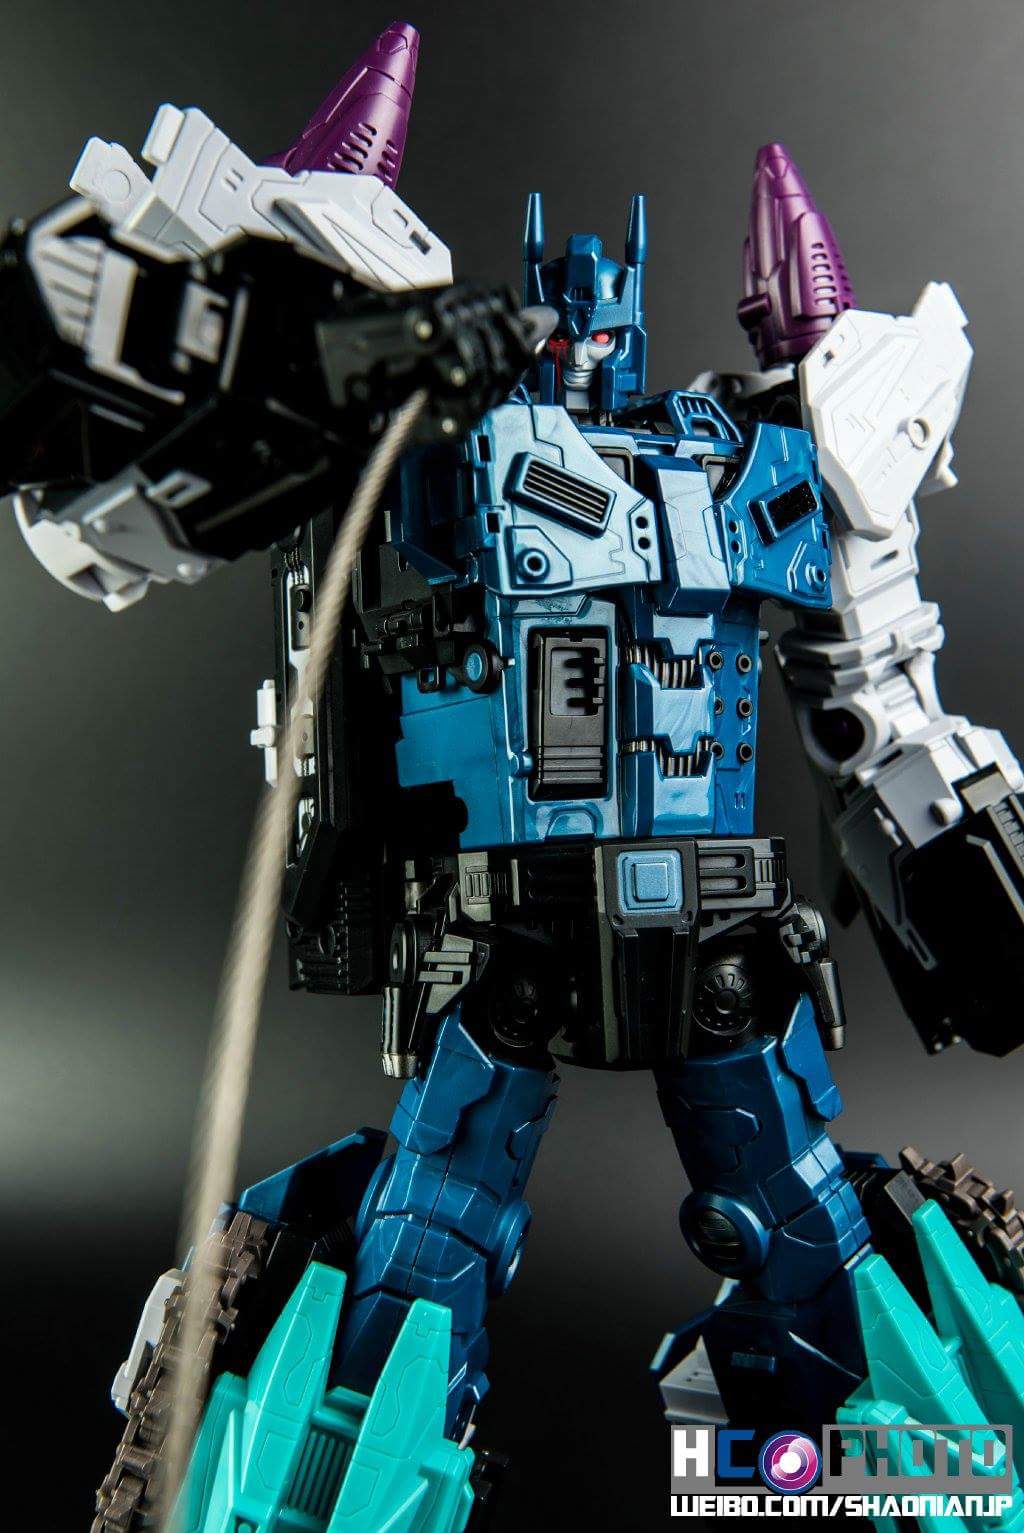 [Mastermind Creations] Produit Tiers - R-17 Carnifex - aka Overlord (TF Masterforce) - Page 3 NVFmXpL3